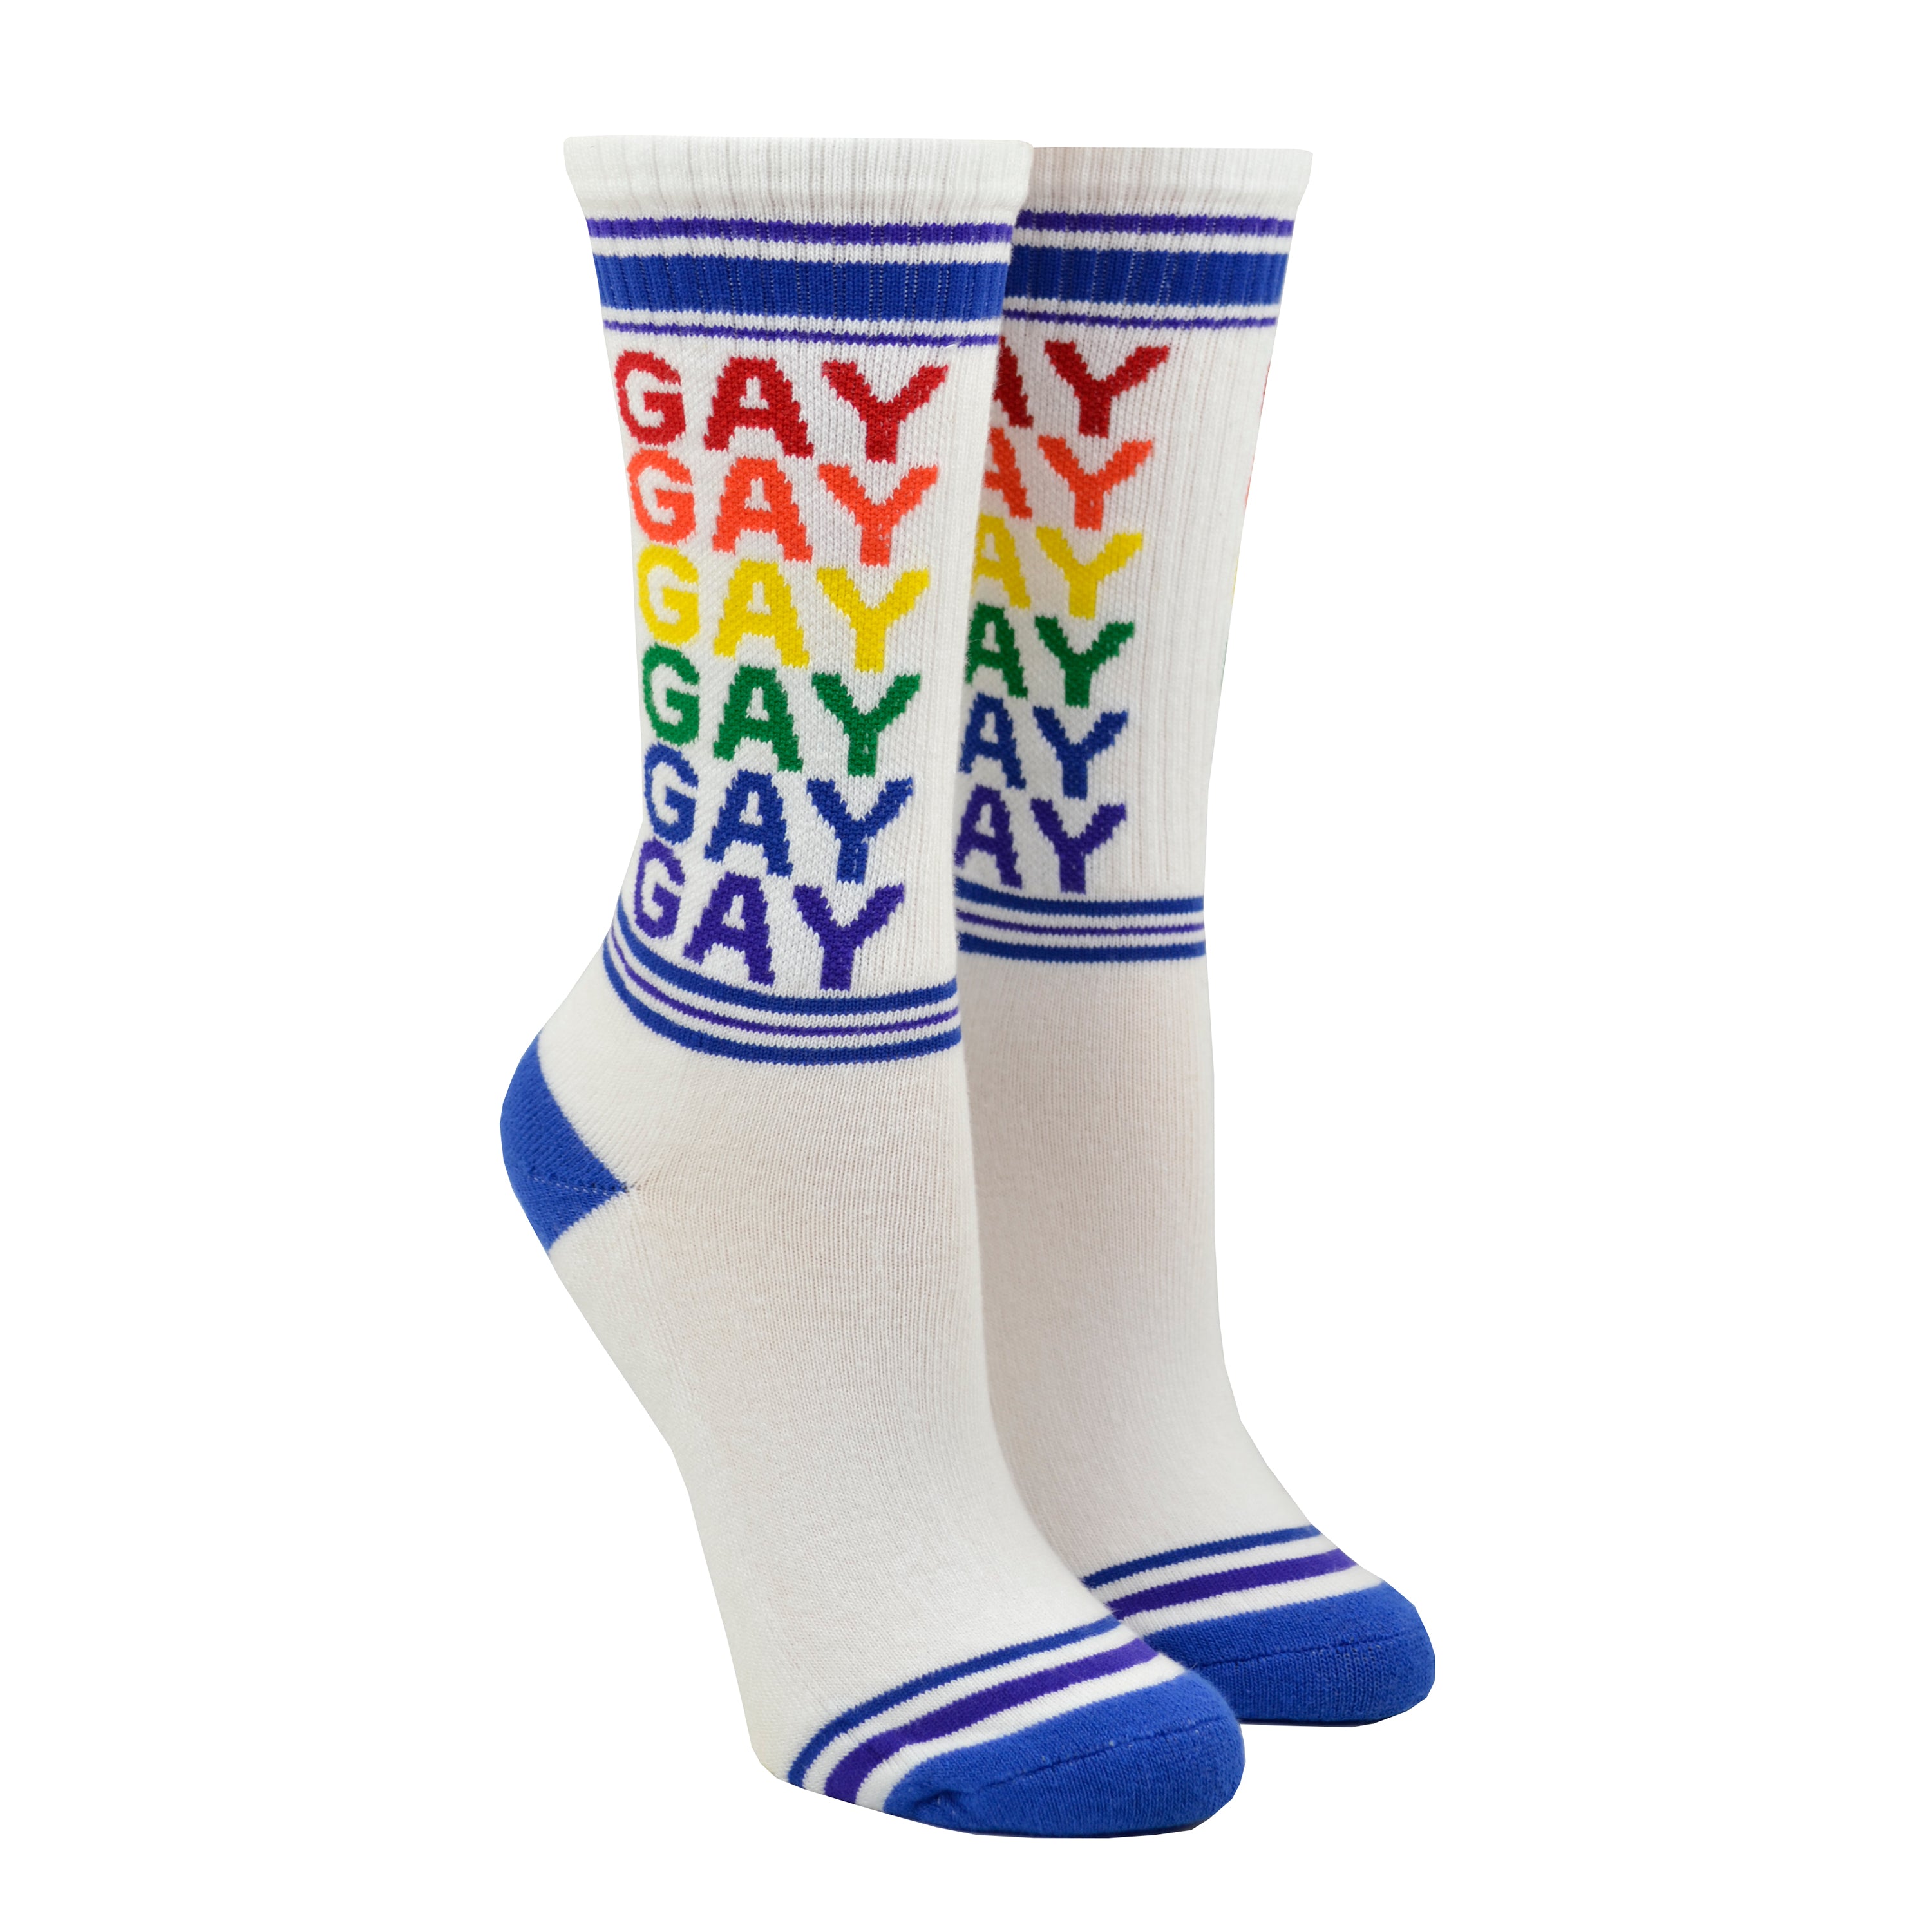 Shown on a leg form, these white cotton unisex crew socks with a blue striped toe and cuff by the brand Gumball Poodle feature the word 